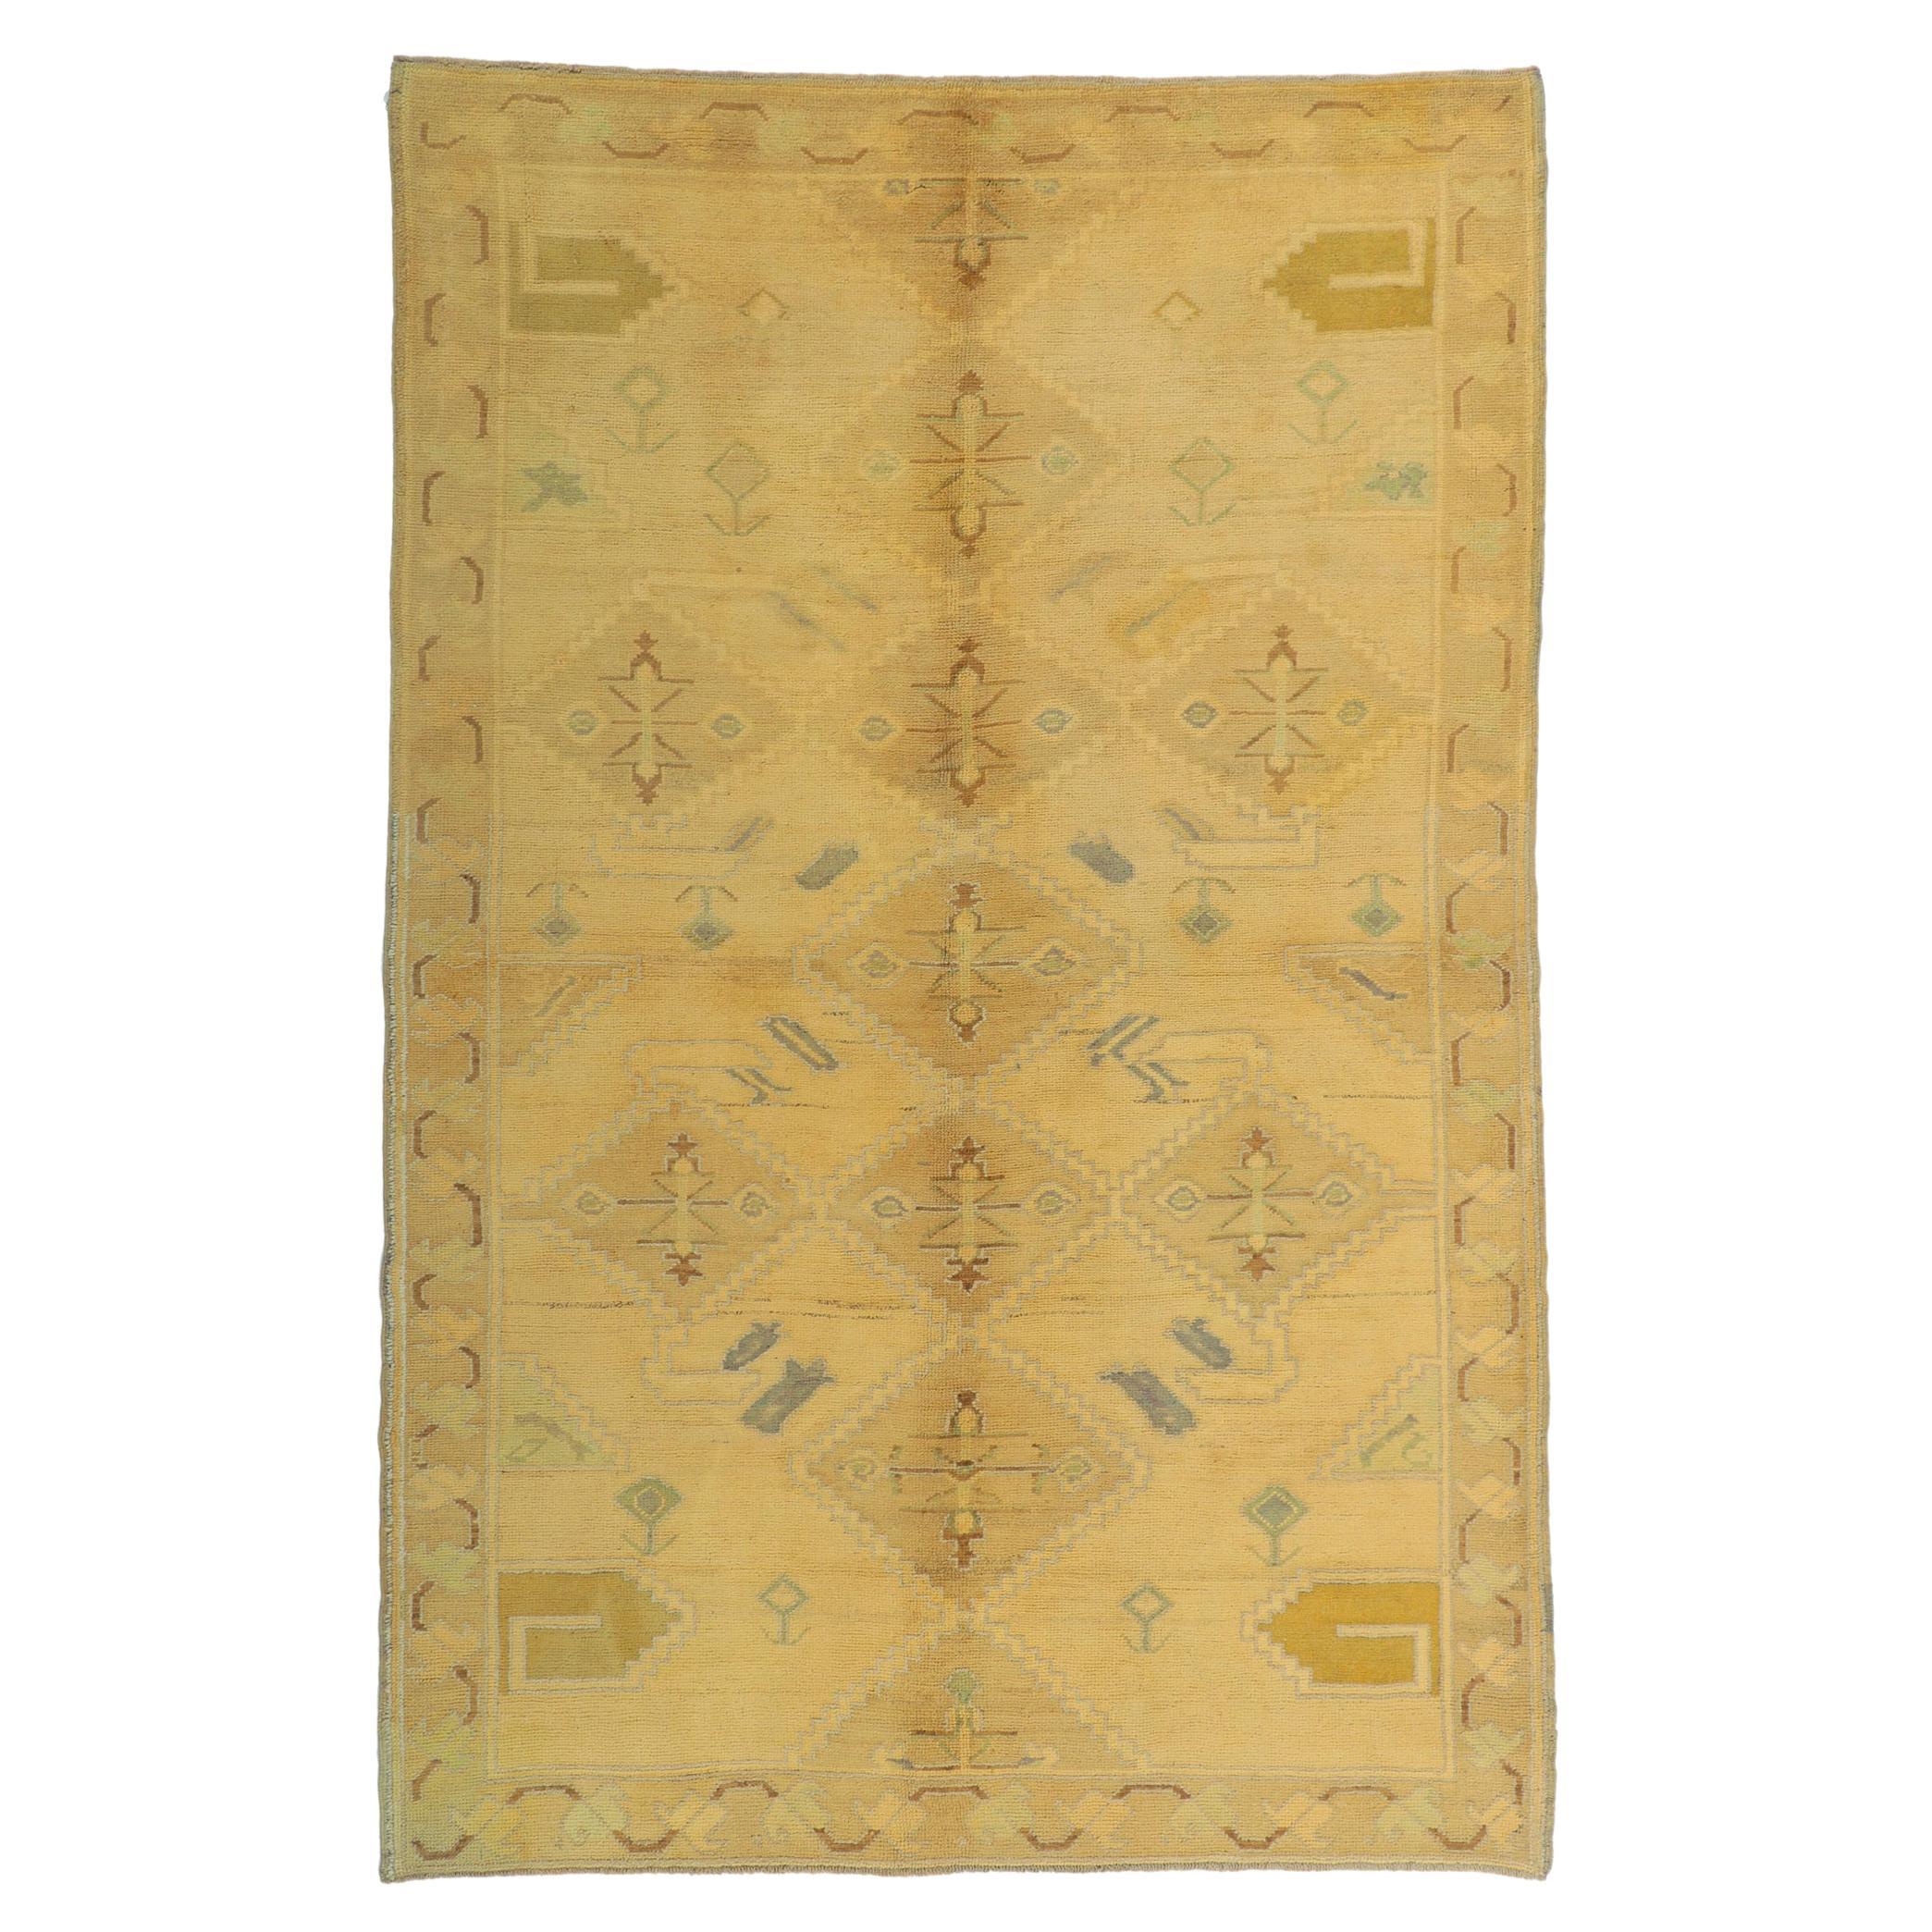 Vintage Turkish Oushak Rug with Soft Pastel Earth-Tone Colors